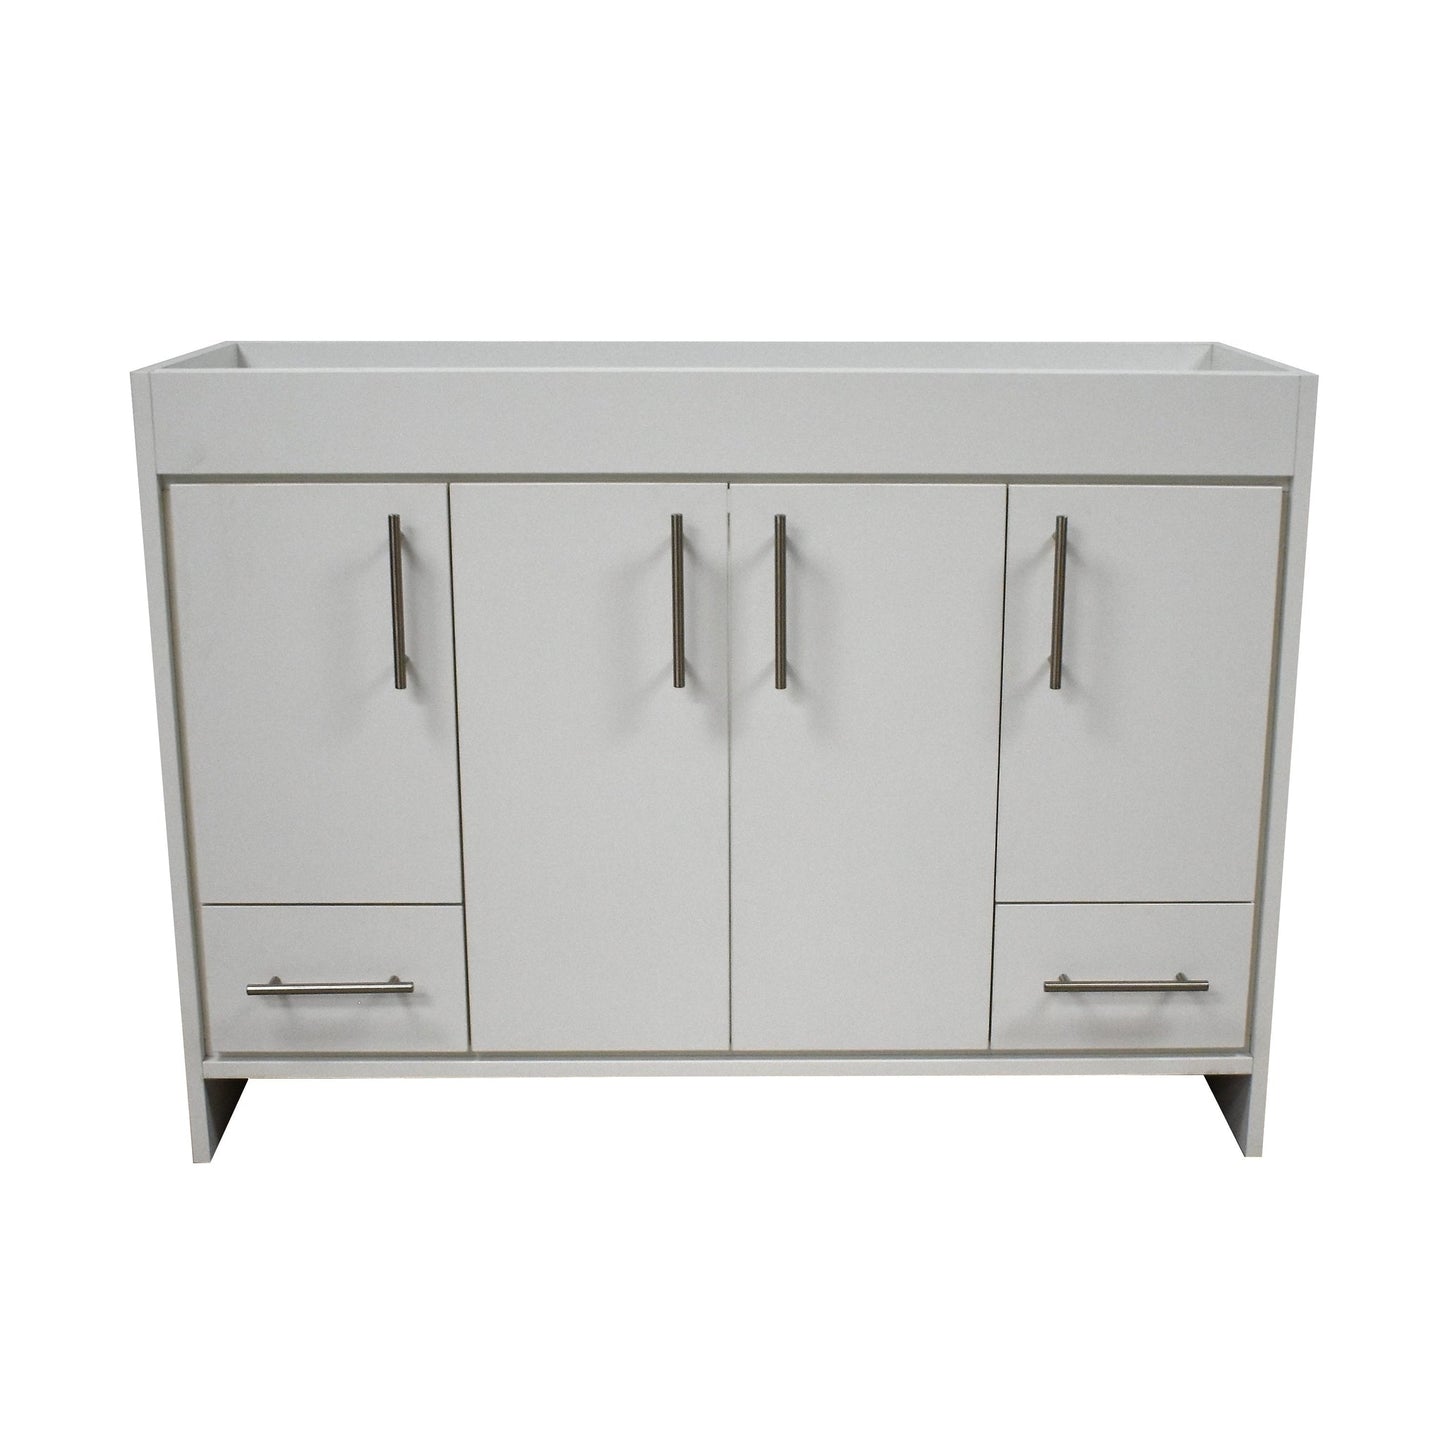 Volpa USA Pacific 48" White Freestanding Modern Bathroom Vanity With Brushed Nickel Round Handles Cabinet Only